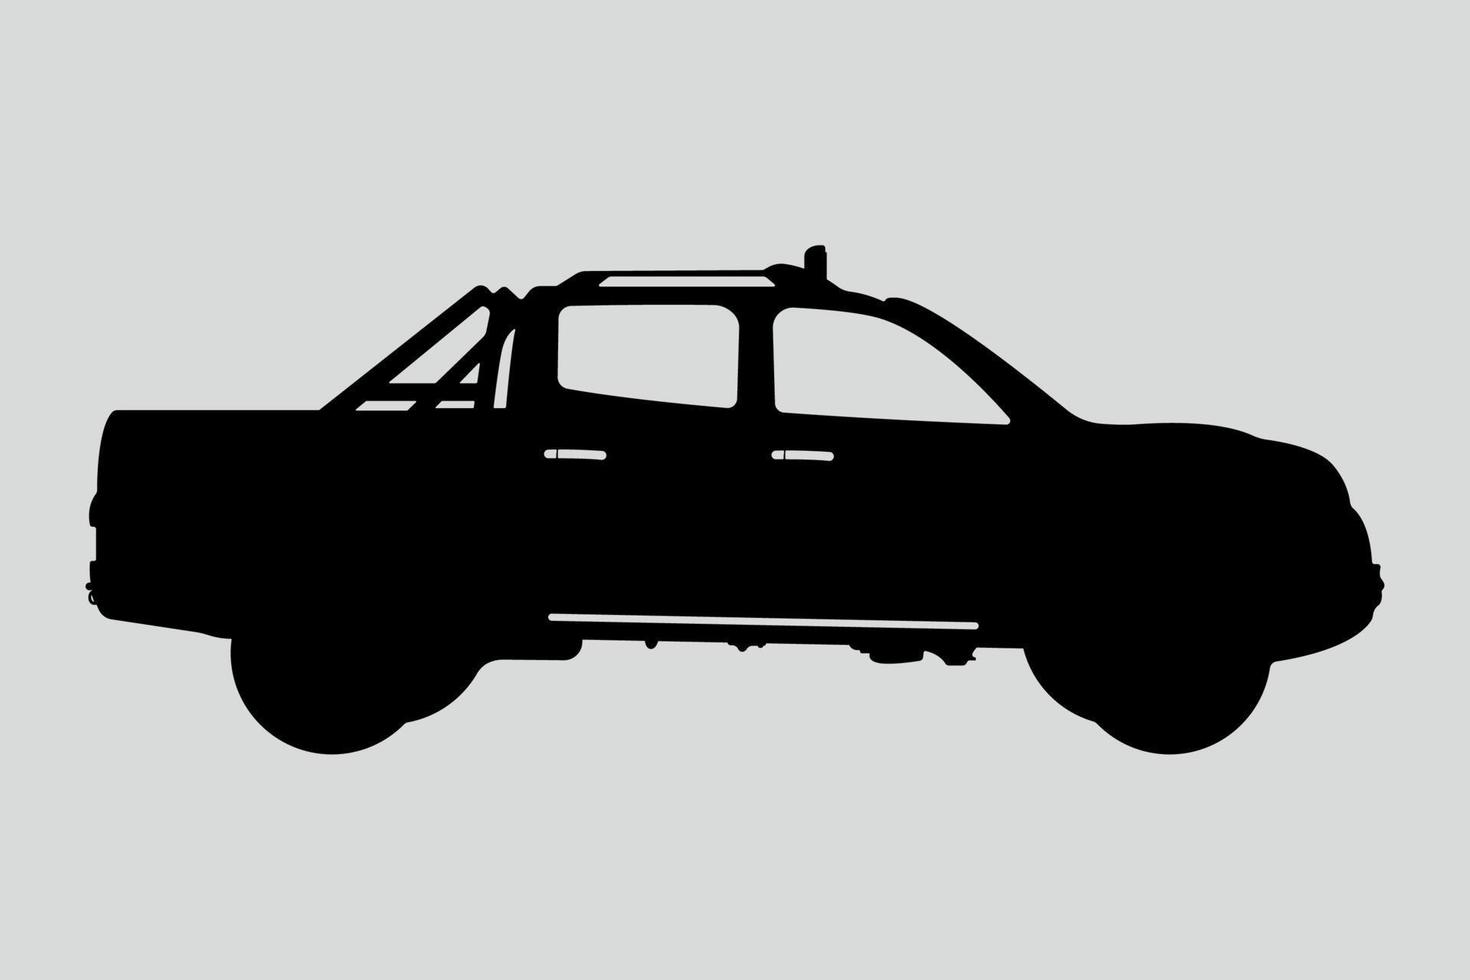 Pickup Truck Car Silhouette Vehicle Illustration. vector